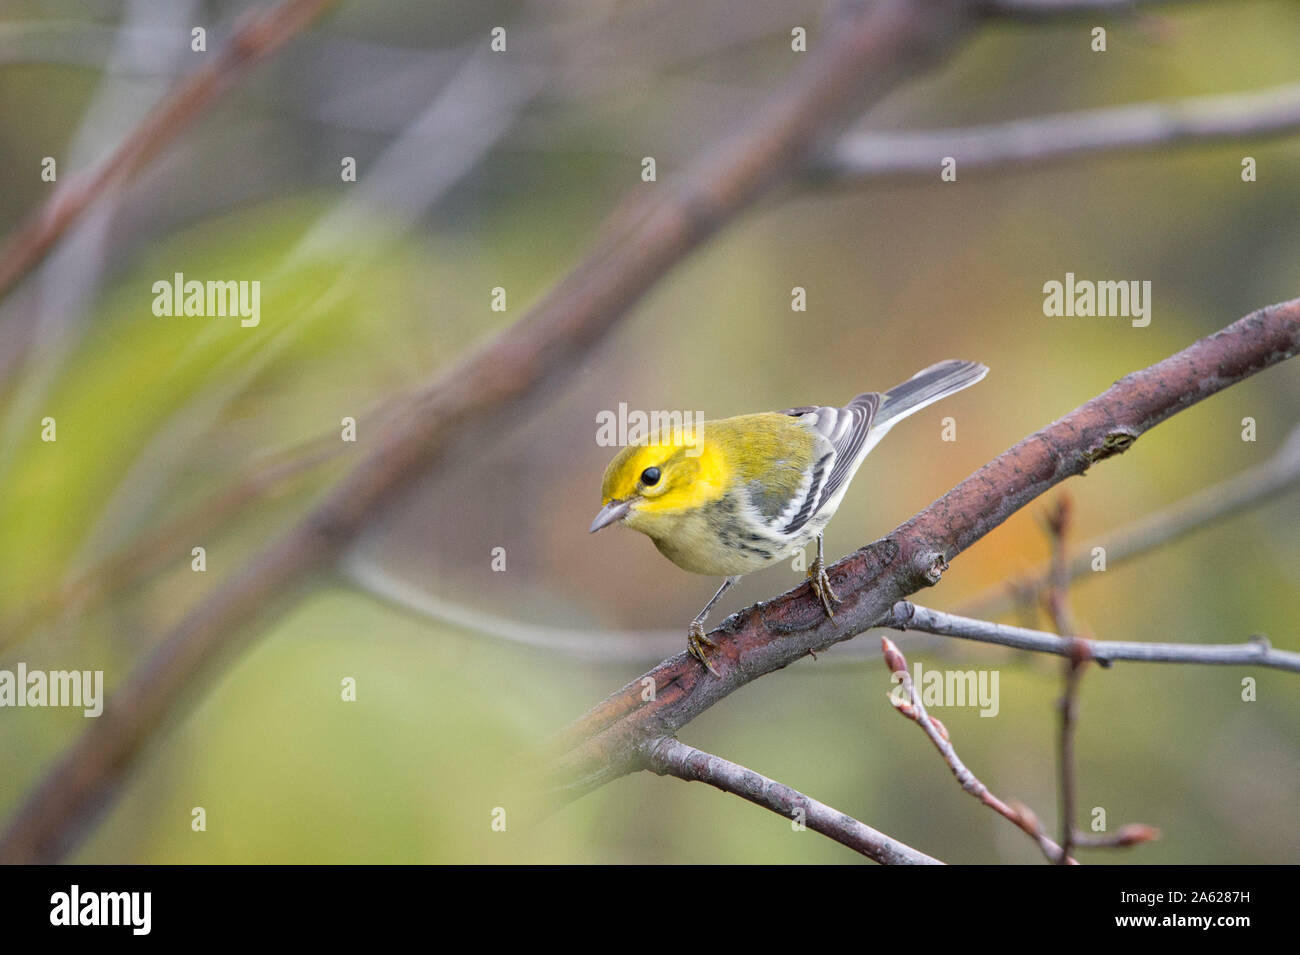 A Black-throated Green Warbler perched in a tree with green leaves in its fall non-breeding plumage. Stock Photo